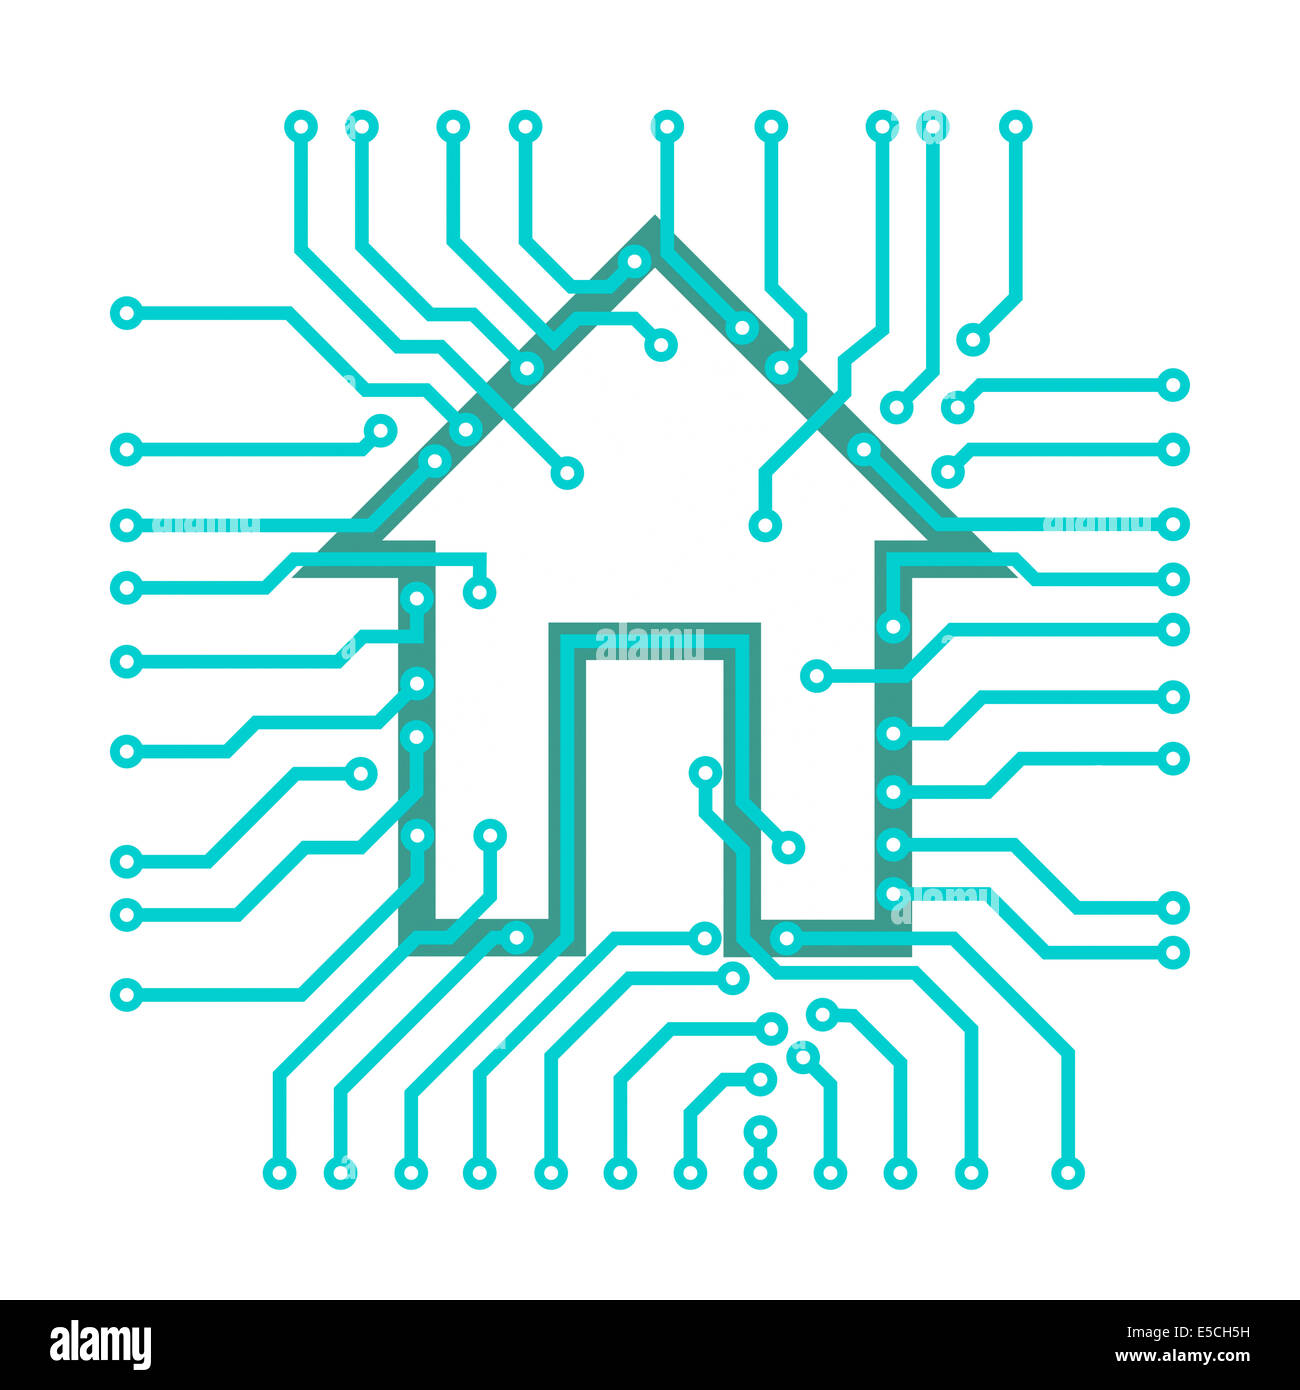 Connected home symbol conceptual illustration of PCB circuits with a house symbol isolated on white background. Vector illustrat Stock Photo